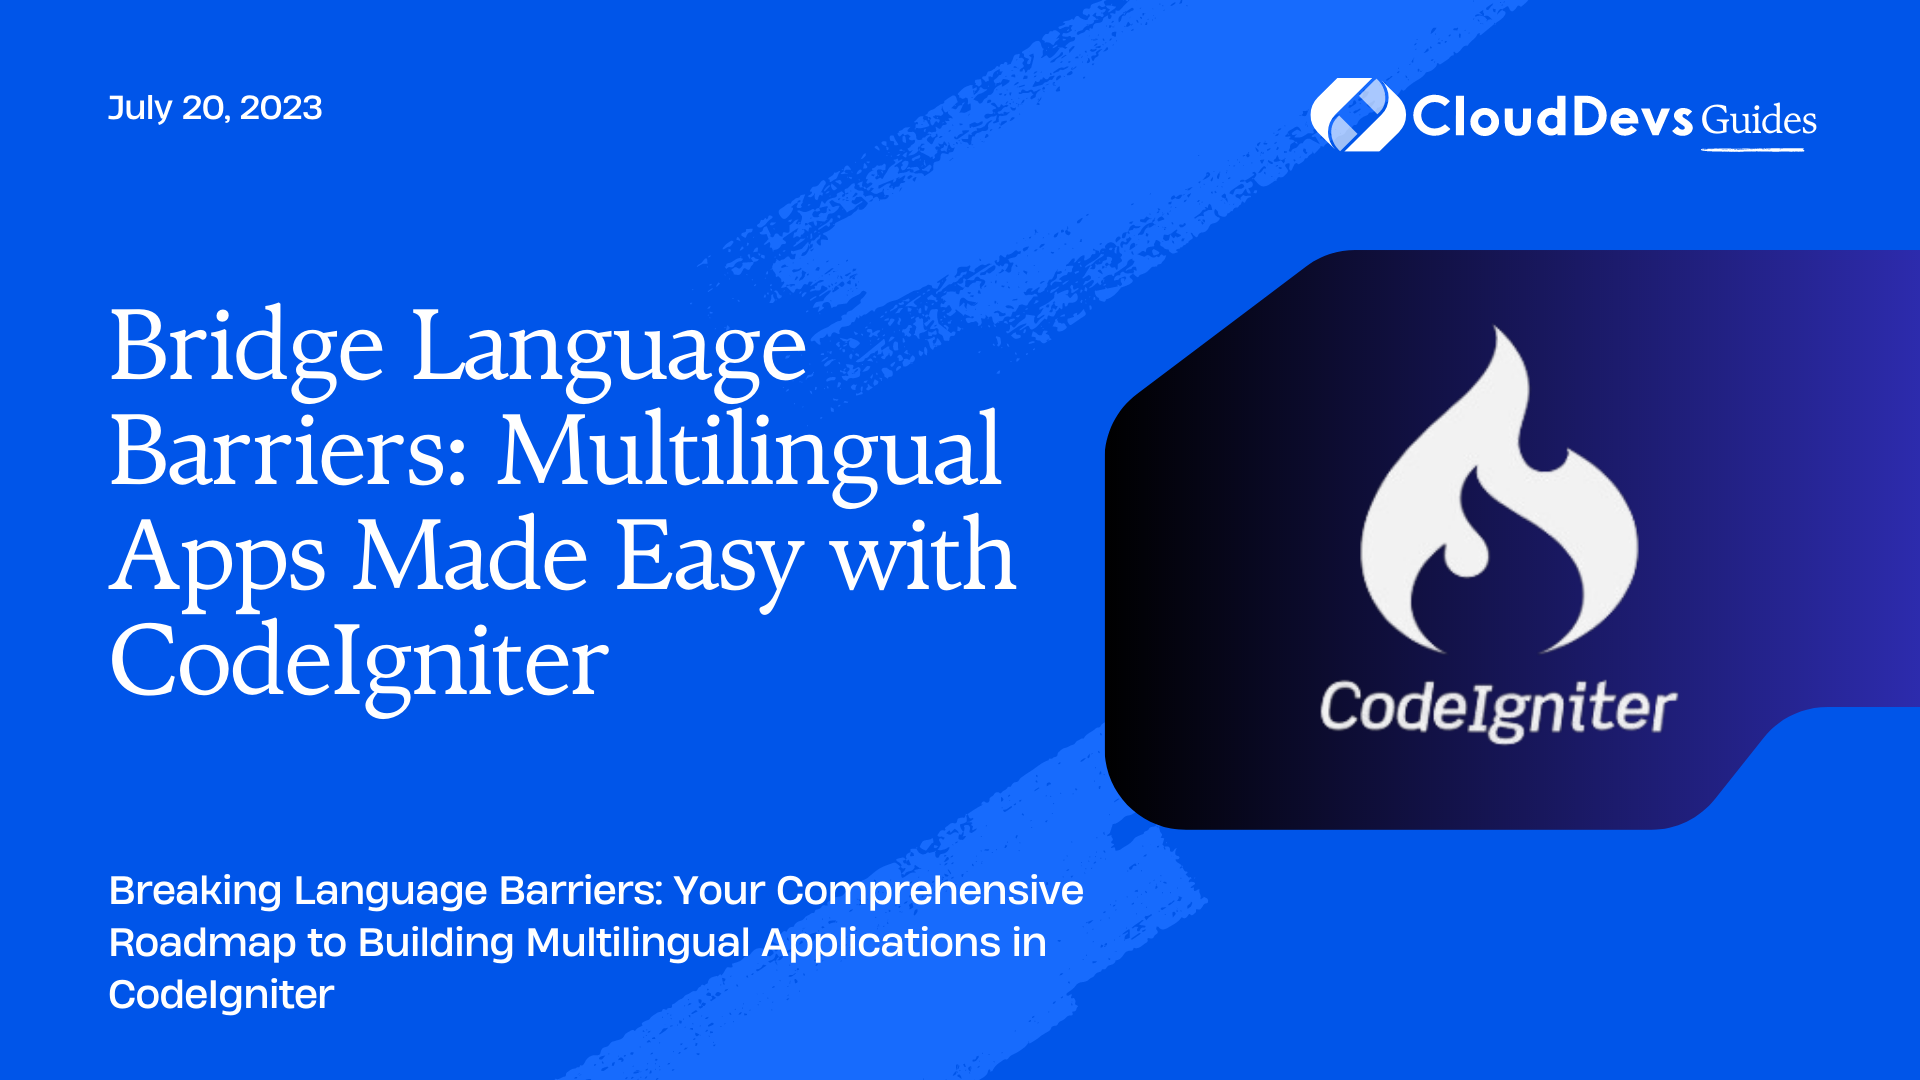 Bridge Language Barriers: Multilingual Apps Made Easy with CodeIgniter